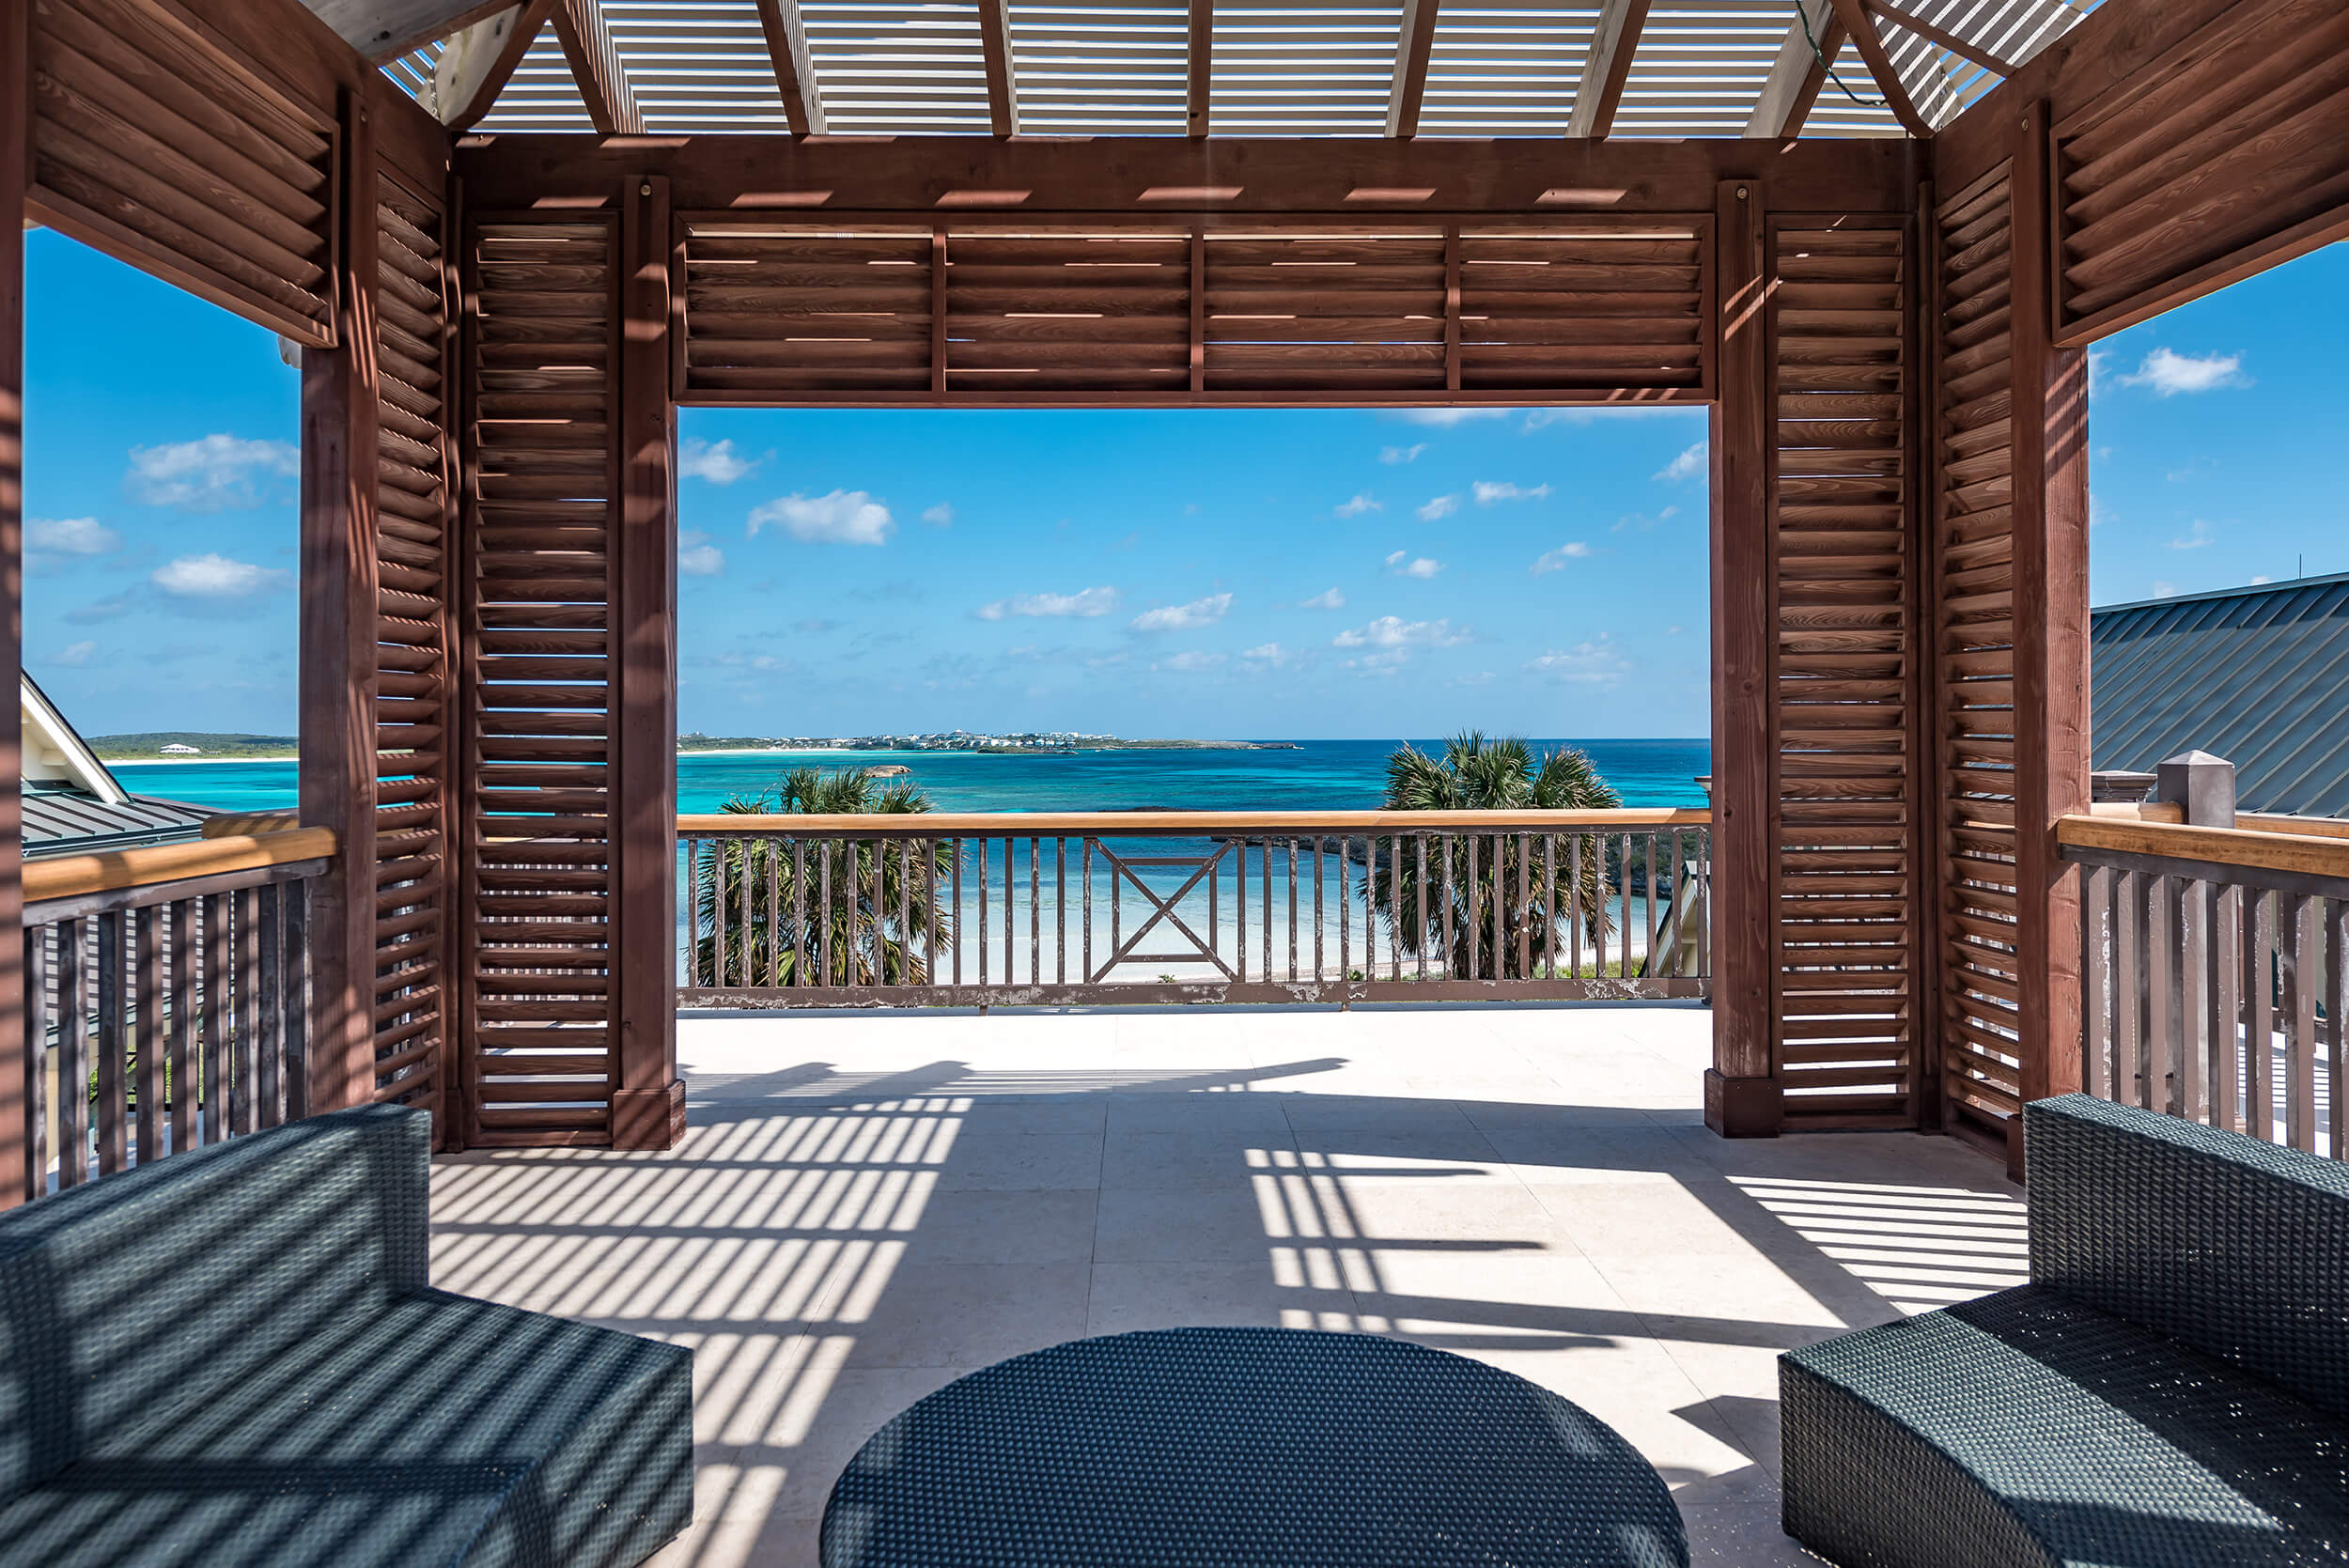 Balcony with ocean views, symbolizing the luxury living at The Abaco Club